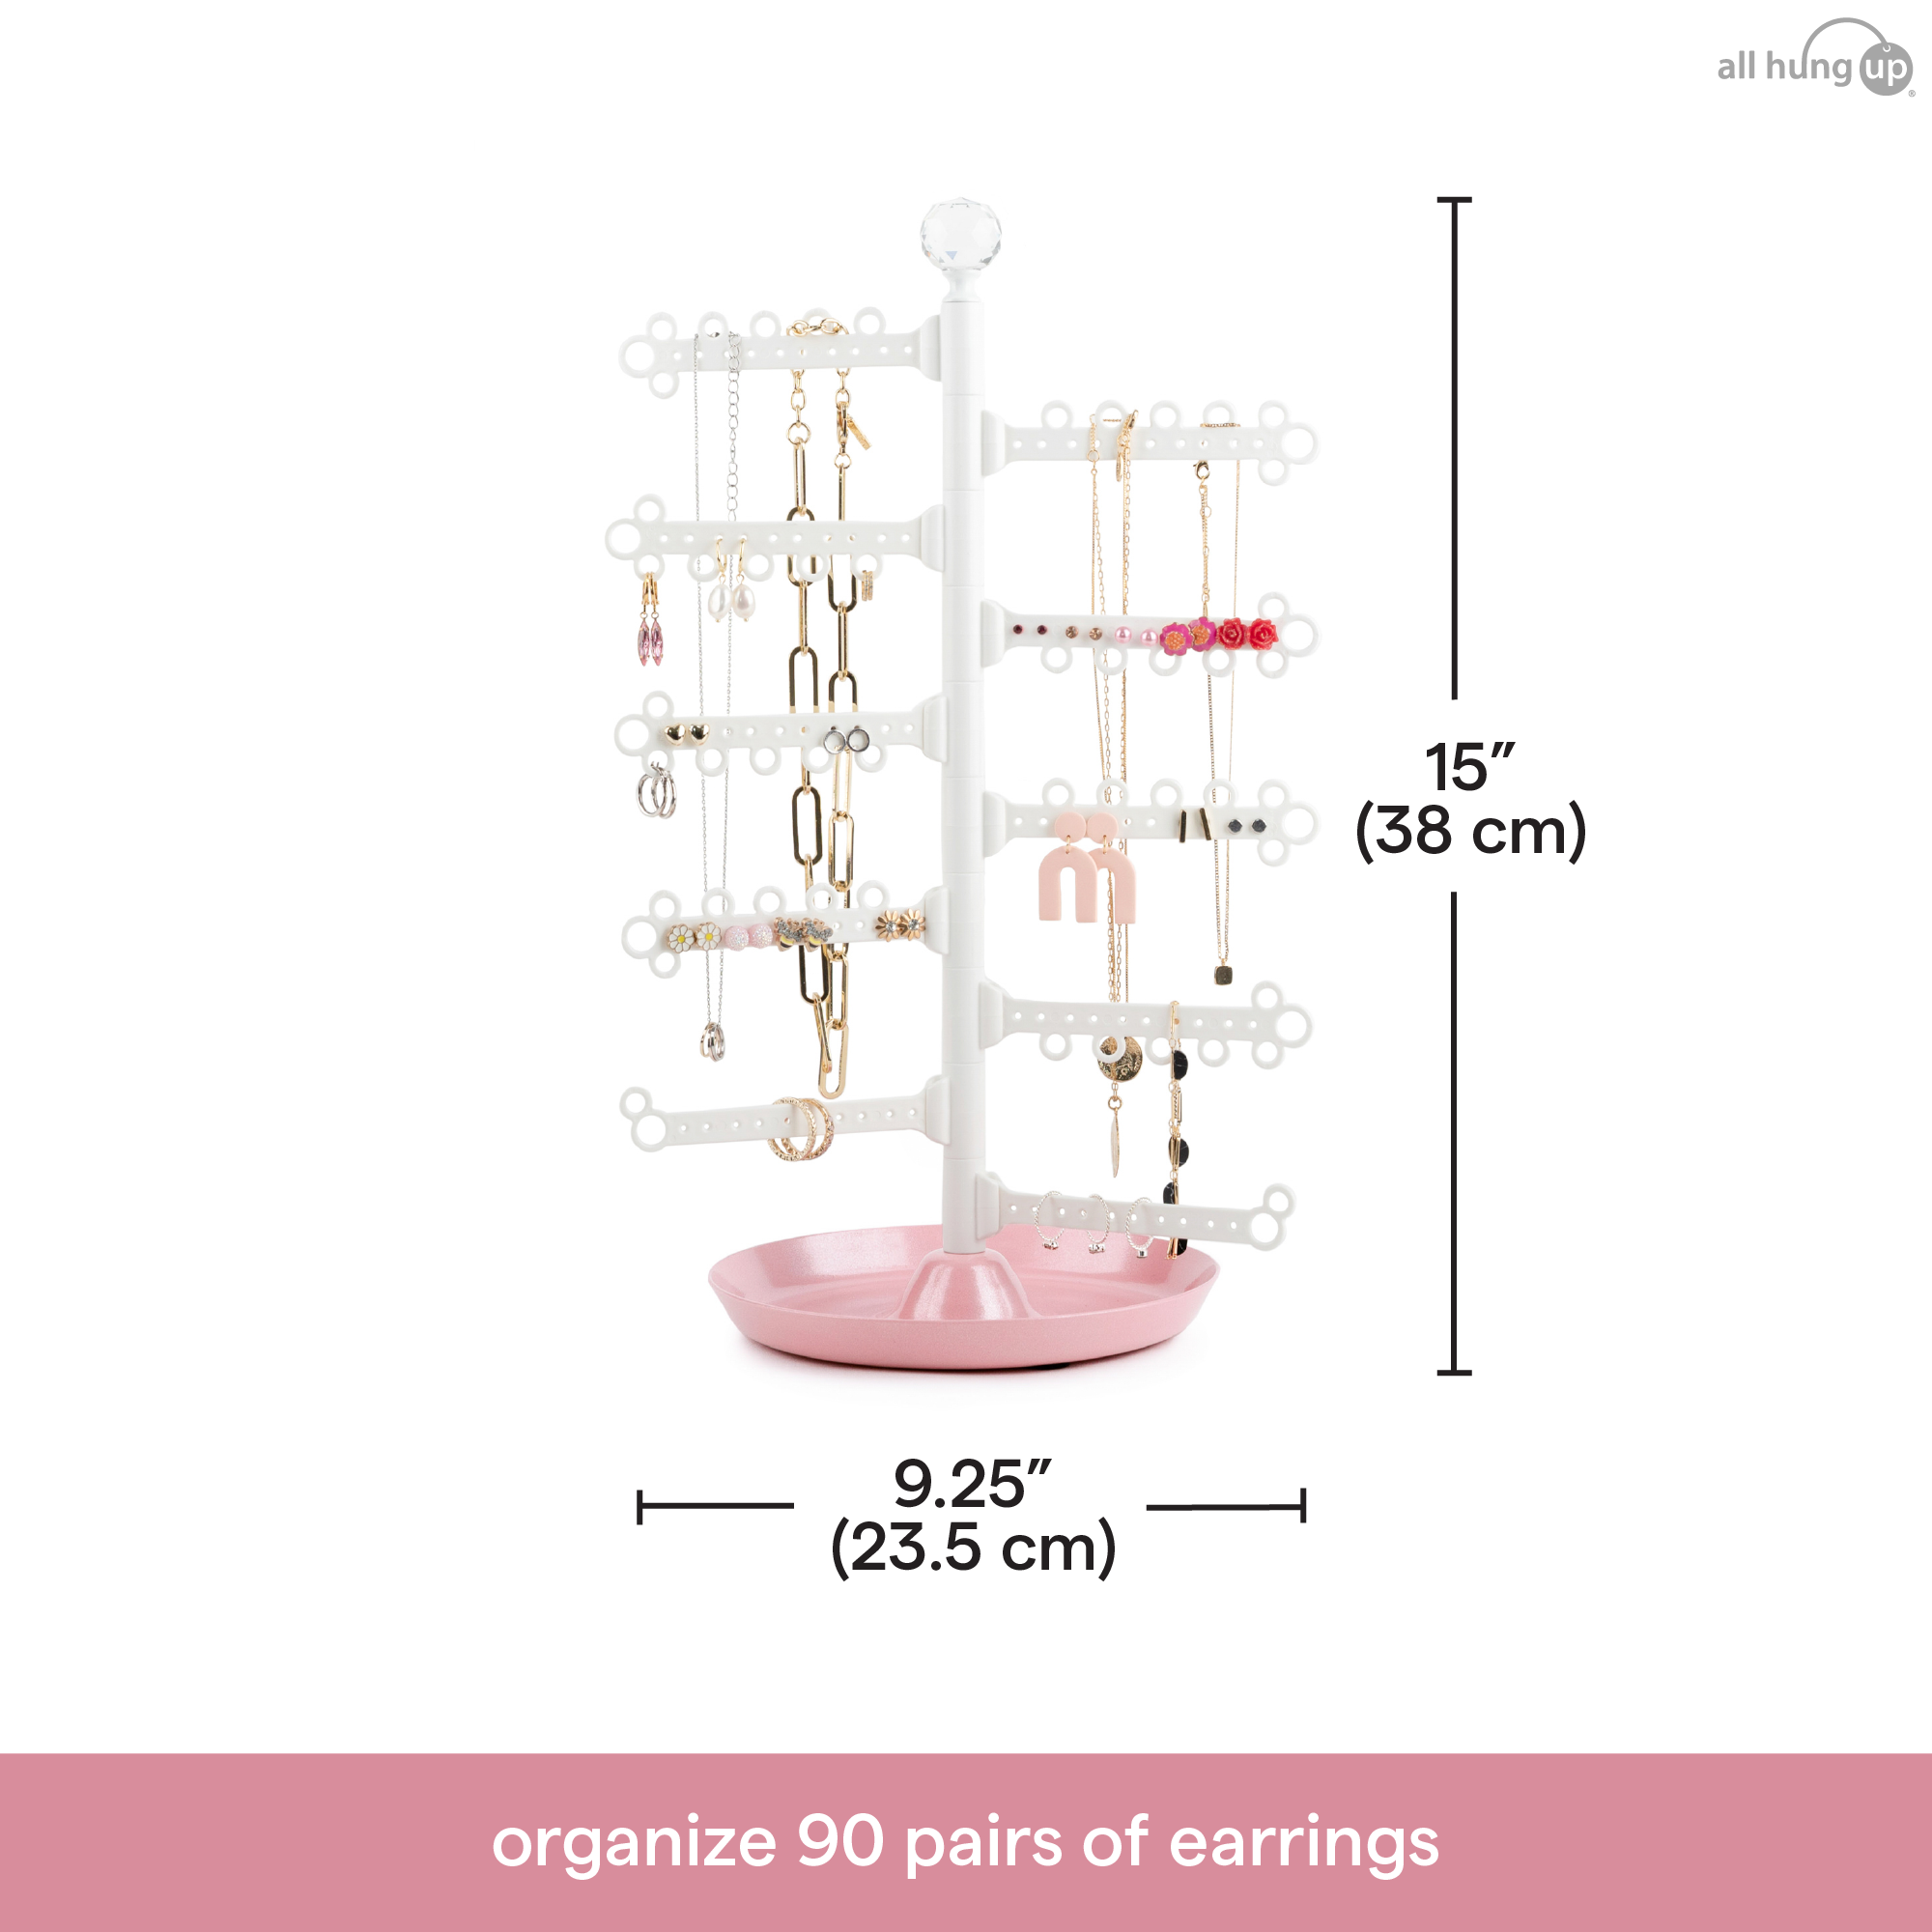 DIY Jewellery Display Stands Kmart With Wooden Base For Earrings, Necklaces,  And Bracelets Organize Your Precious Items With Ease L231121 From  Designer_beanie, $3.41 | DHgate.Com